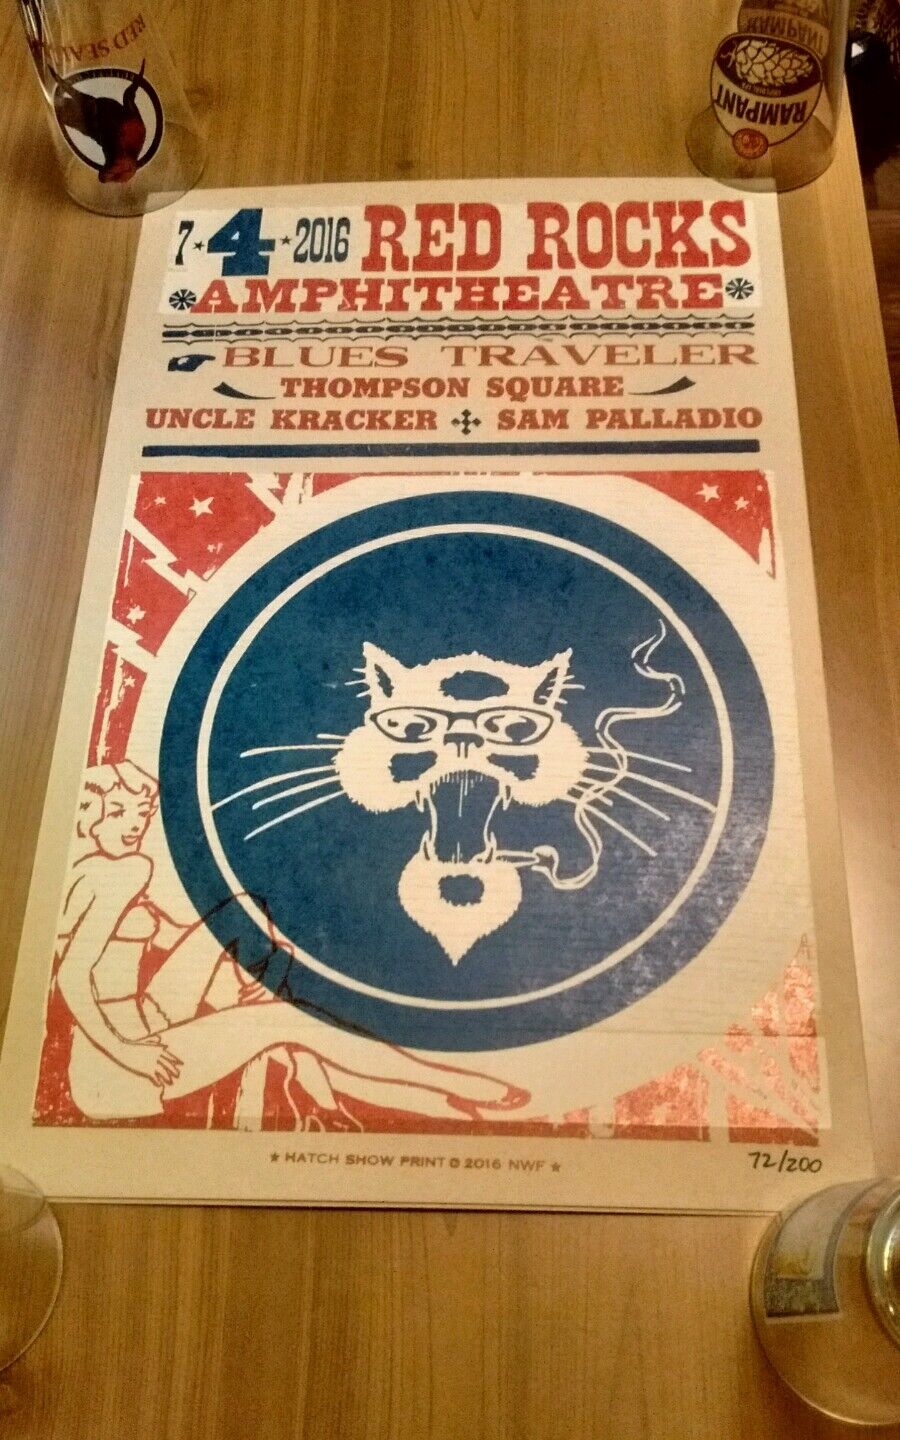 BLUES TRAVELER POSTER July 4th 2016 RED ROCKS UNCLE CRACKER THOMPSON SQUARE 